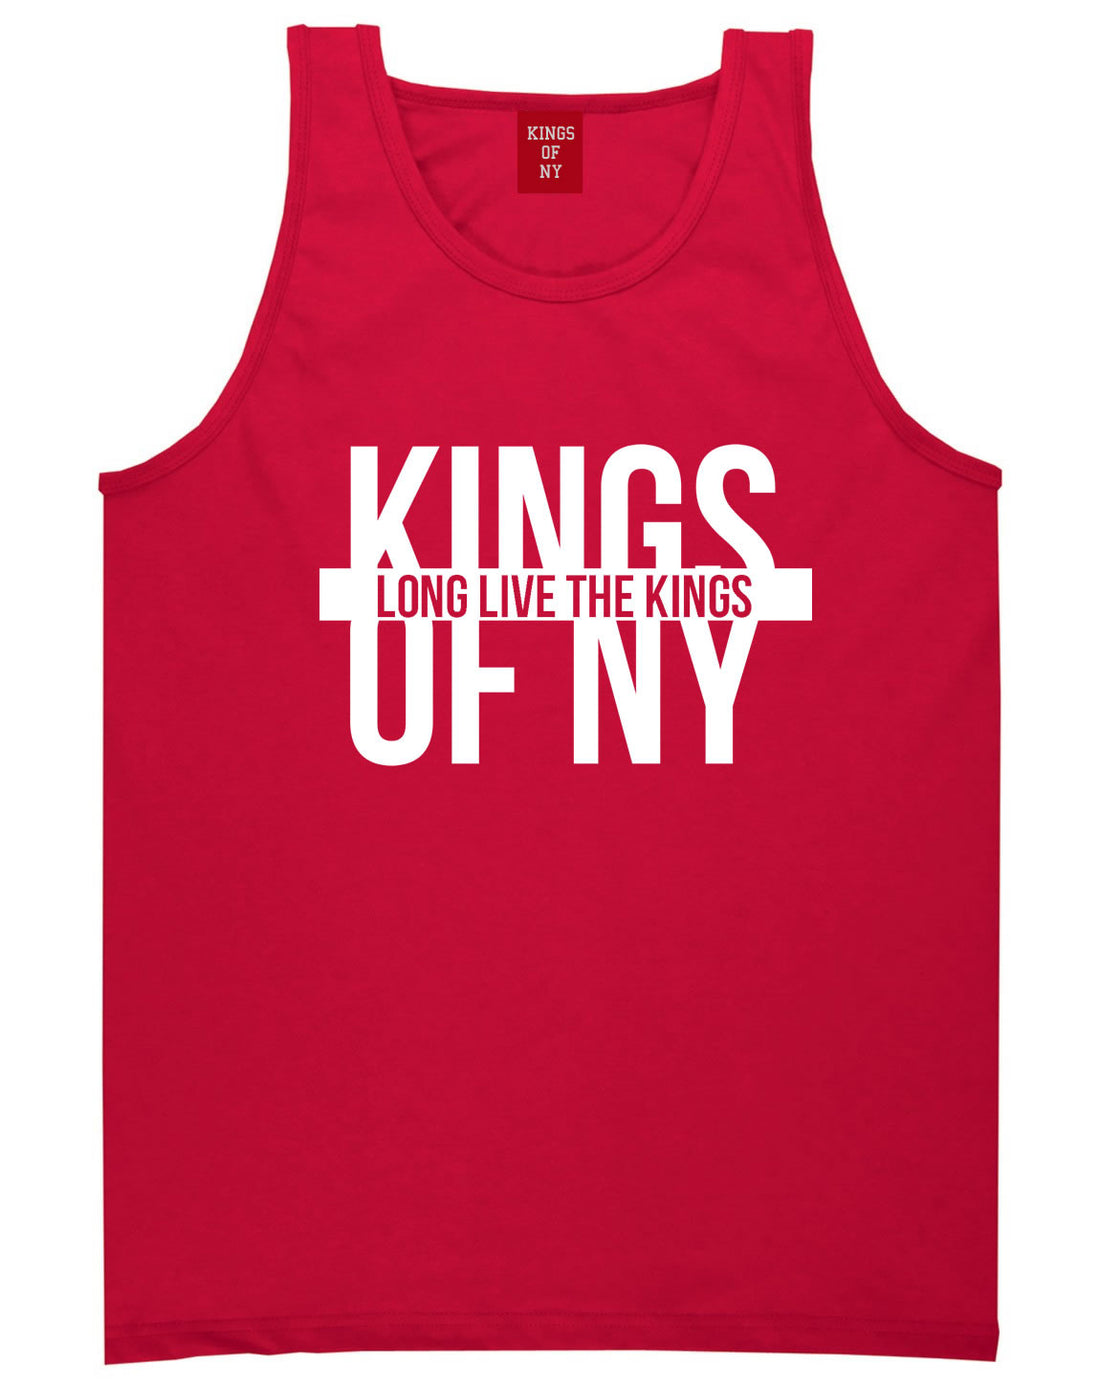 Long Live the Kings Tank Top in Red by Kings Of NY